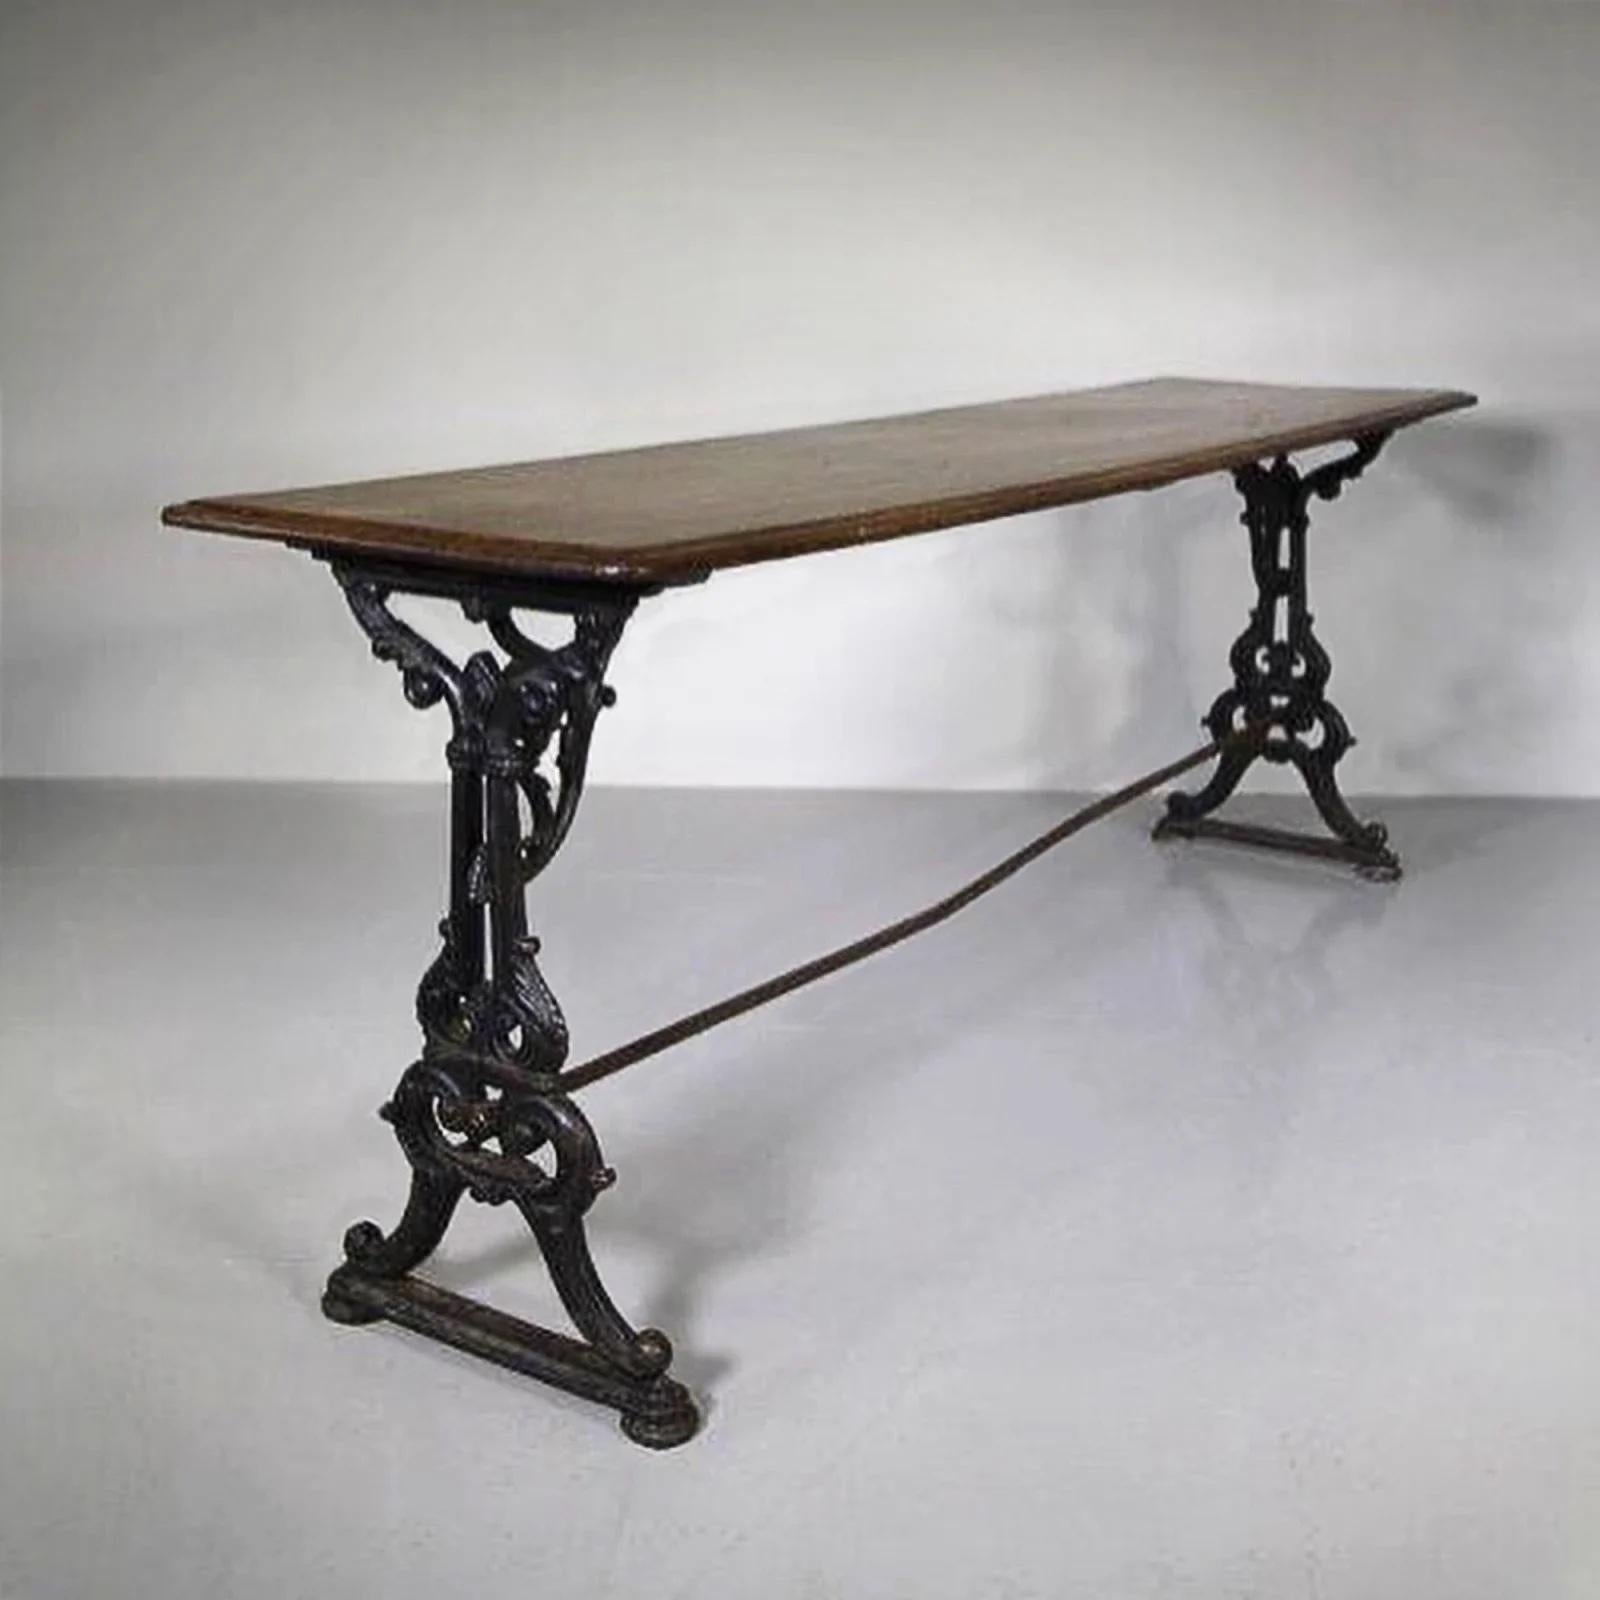 An unusual and charming trestle table, the top a single piece of beautifully coloured mahogany on an ornate cast iron base.
English c. 1865
H: 77cm (30.31in) W: 208cm (81.89in) D: 54cm (21.26in)